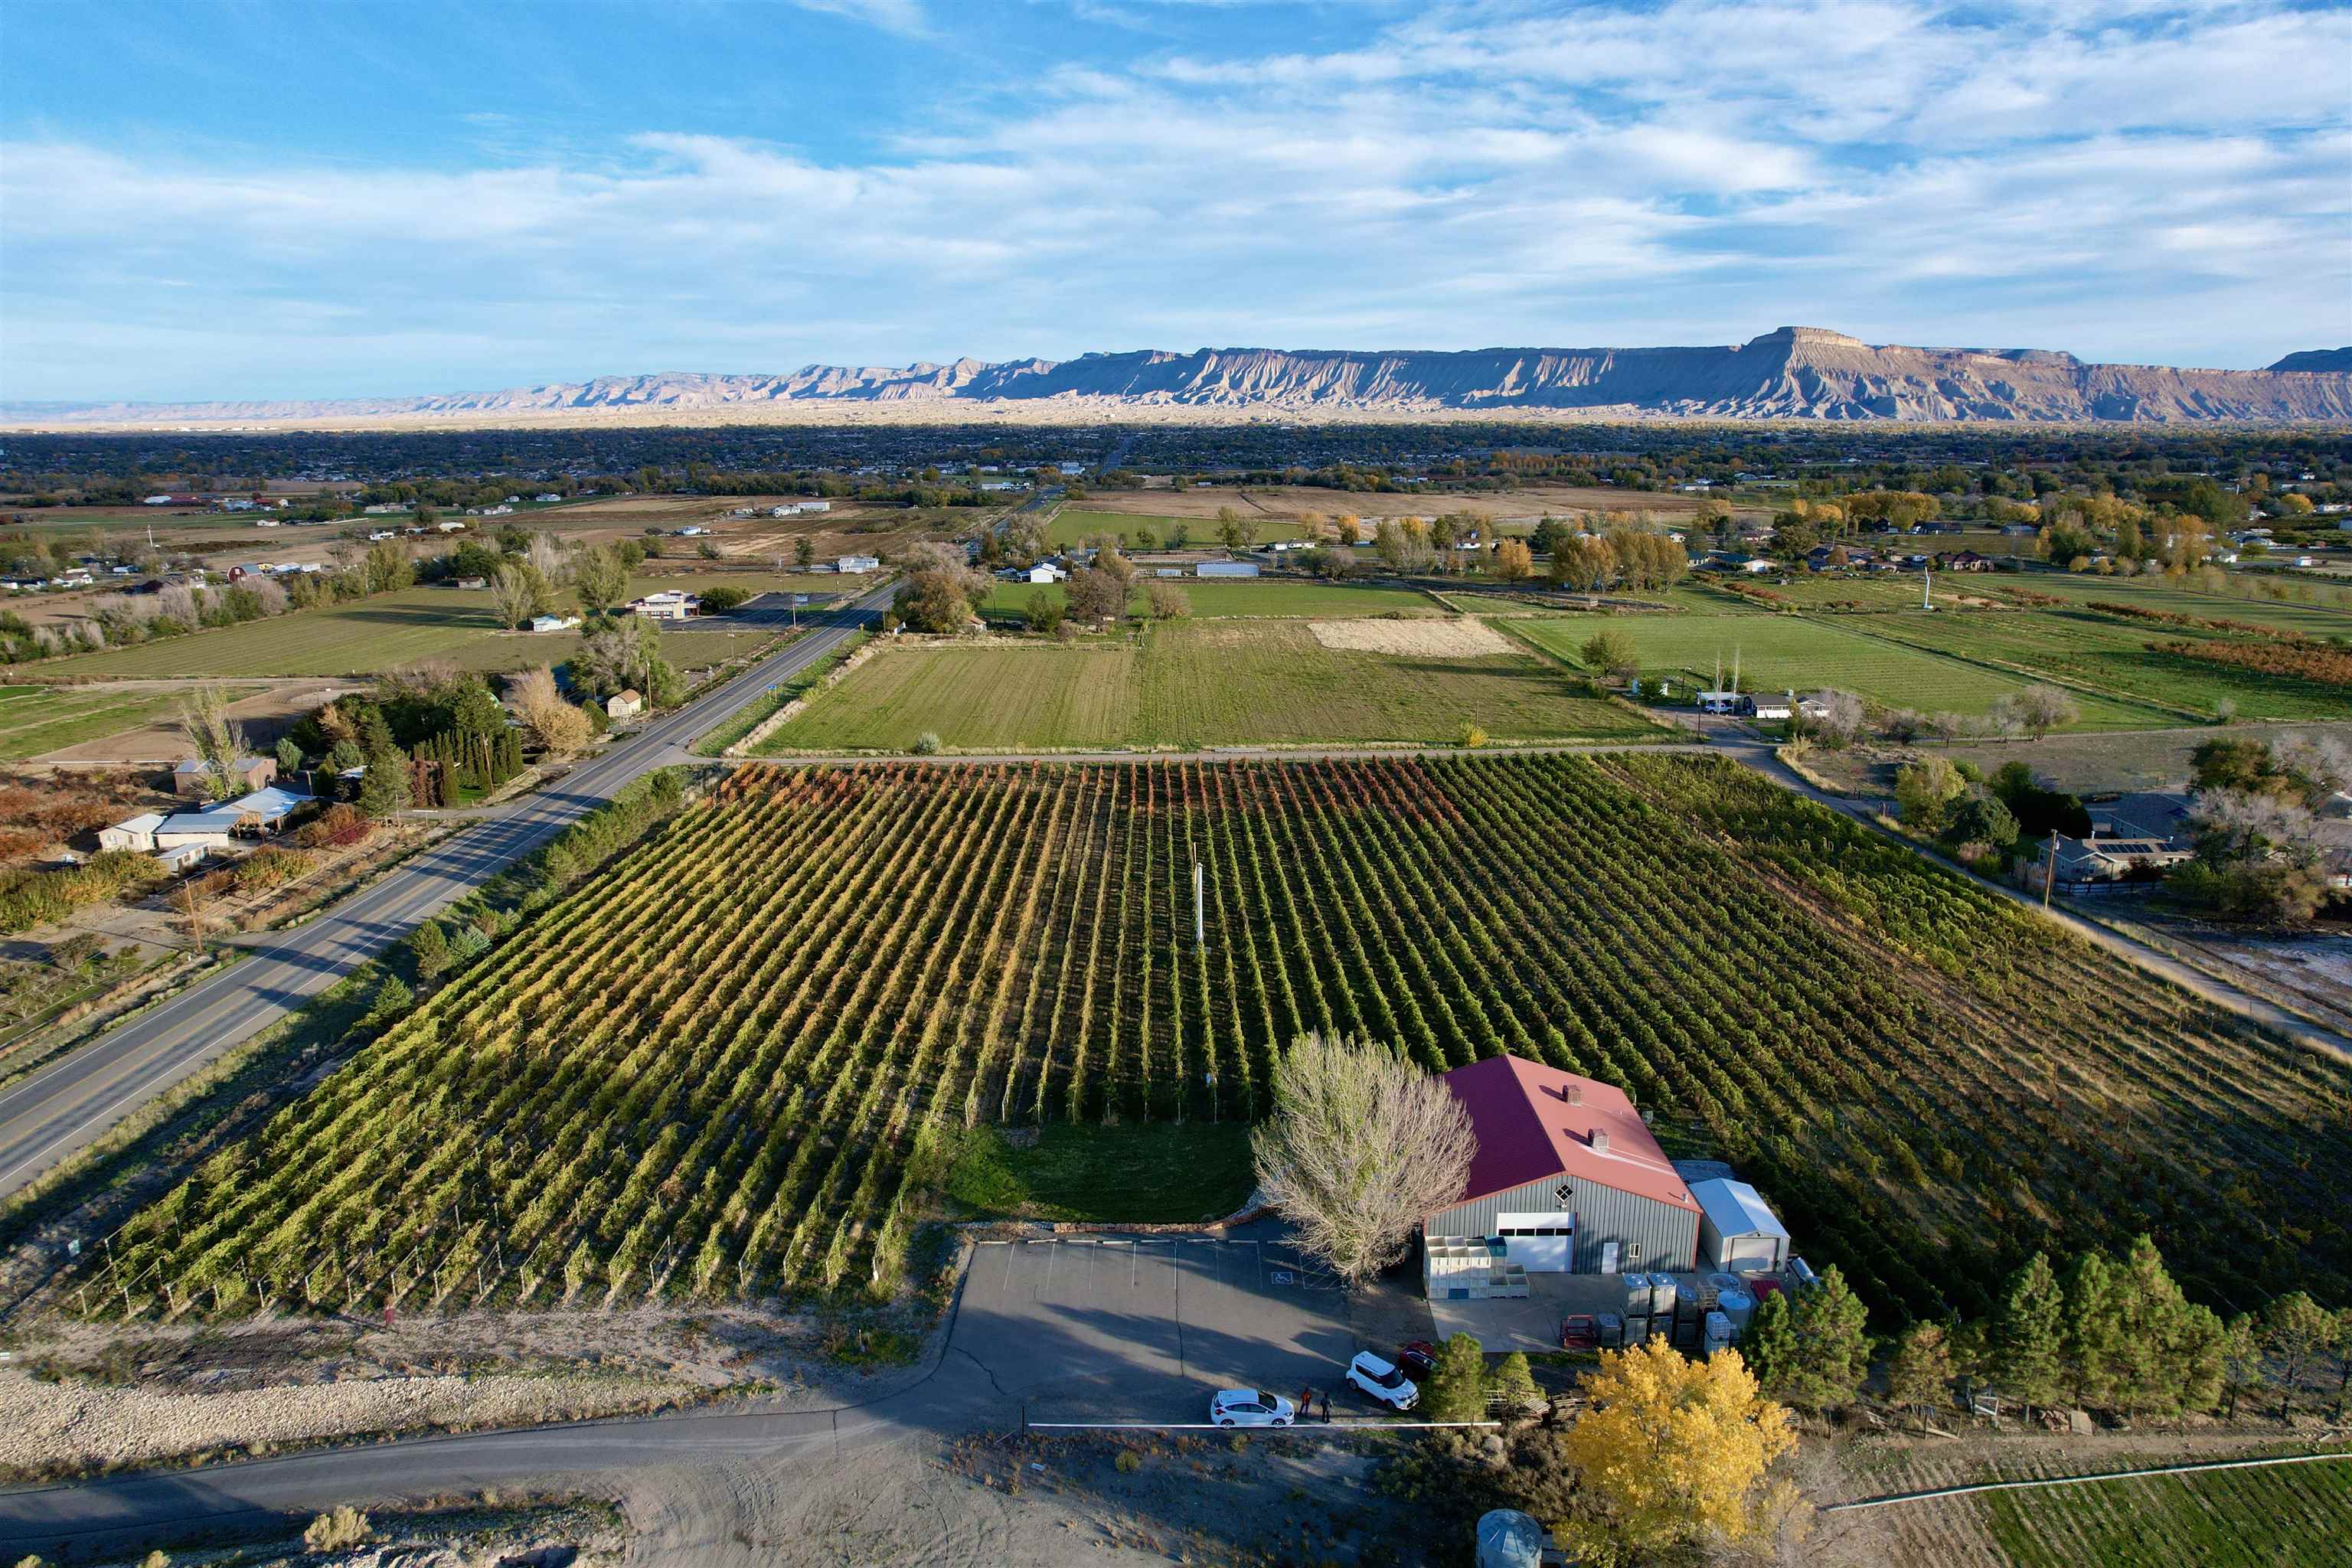 220 32 Road, Grand Junction, CO